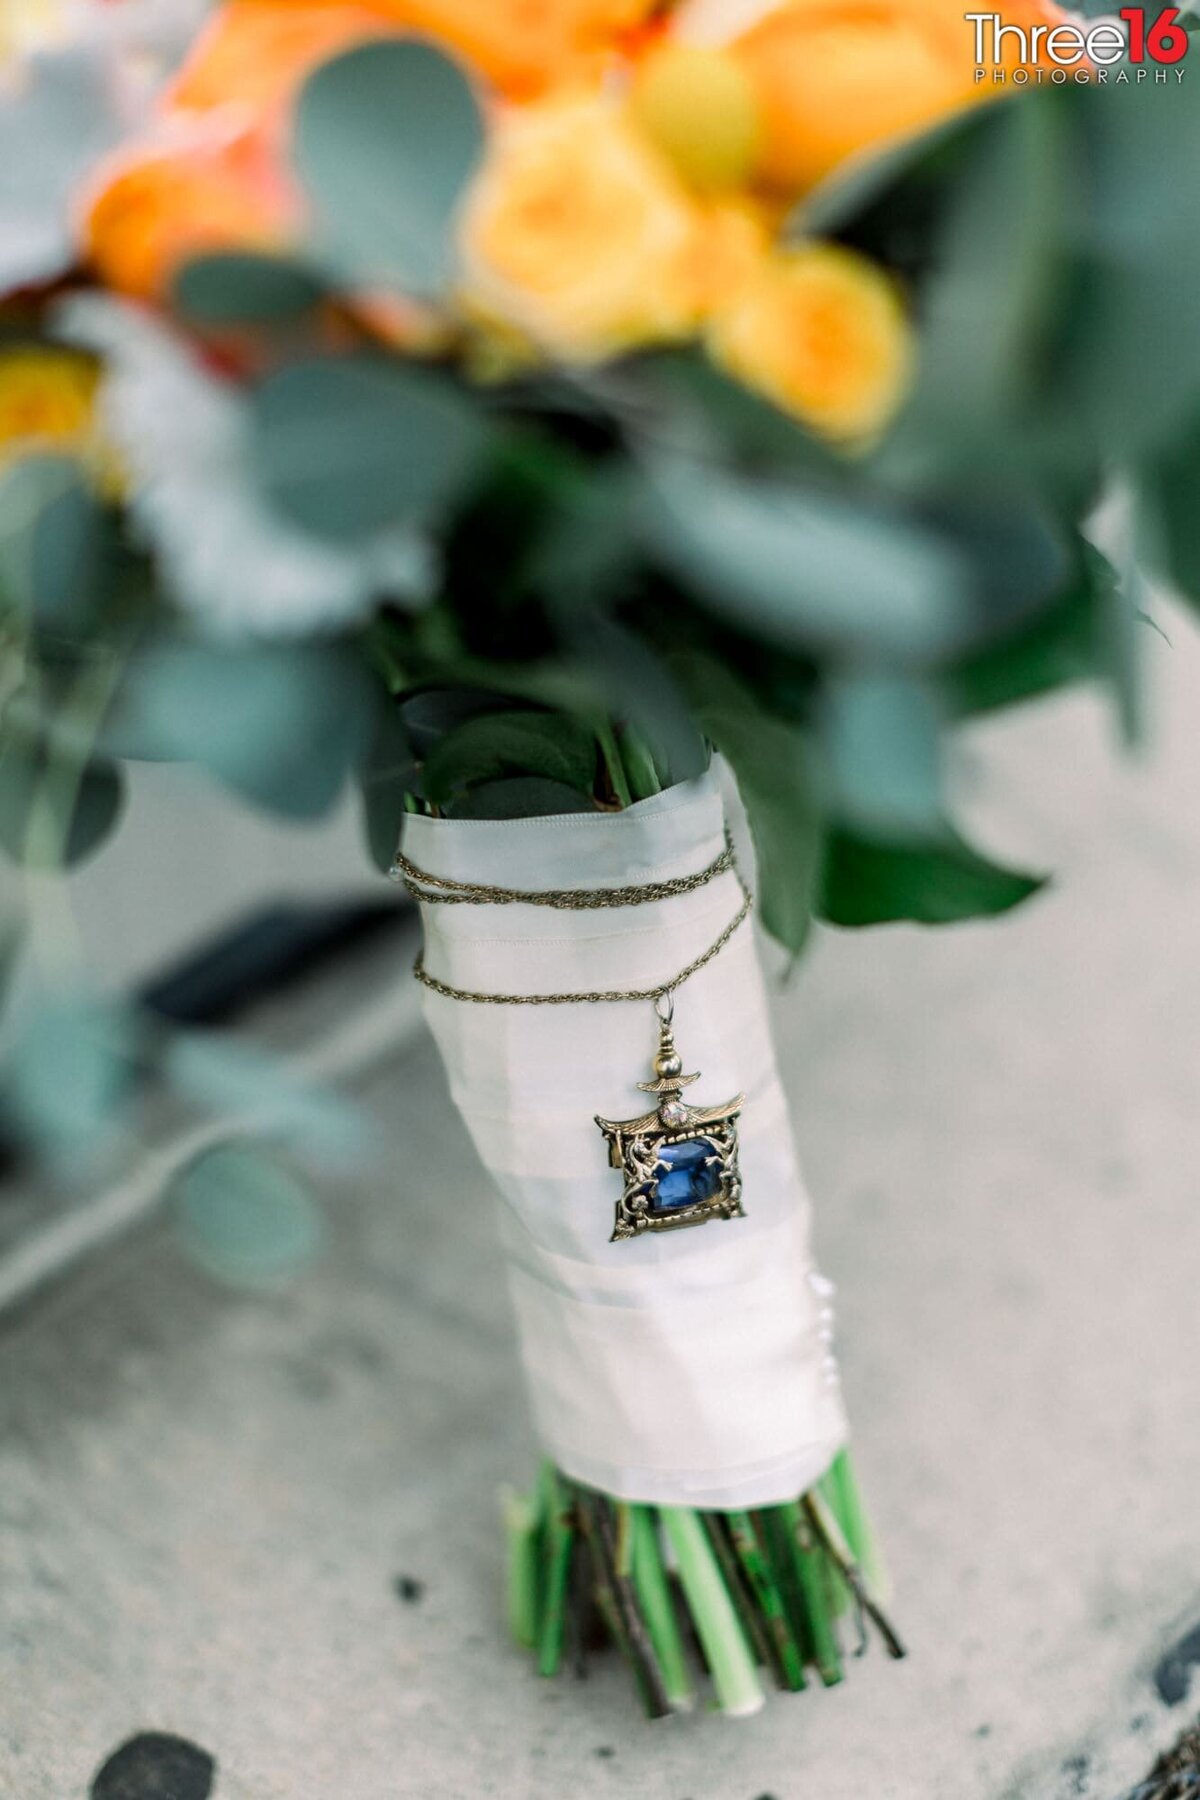 Necklace that is borrowed and blue is wrapped around the Bride's bouquet